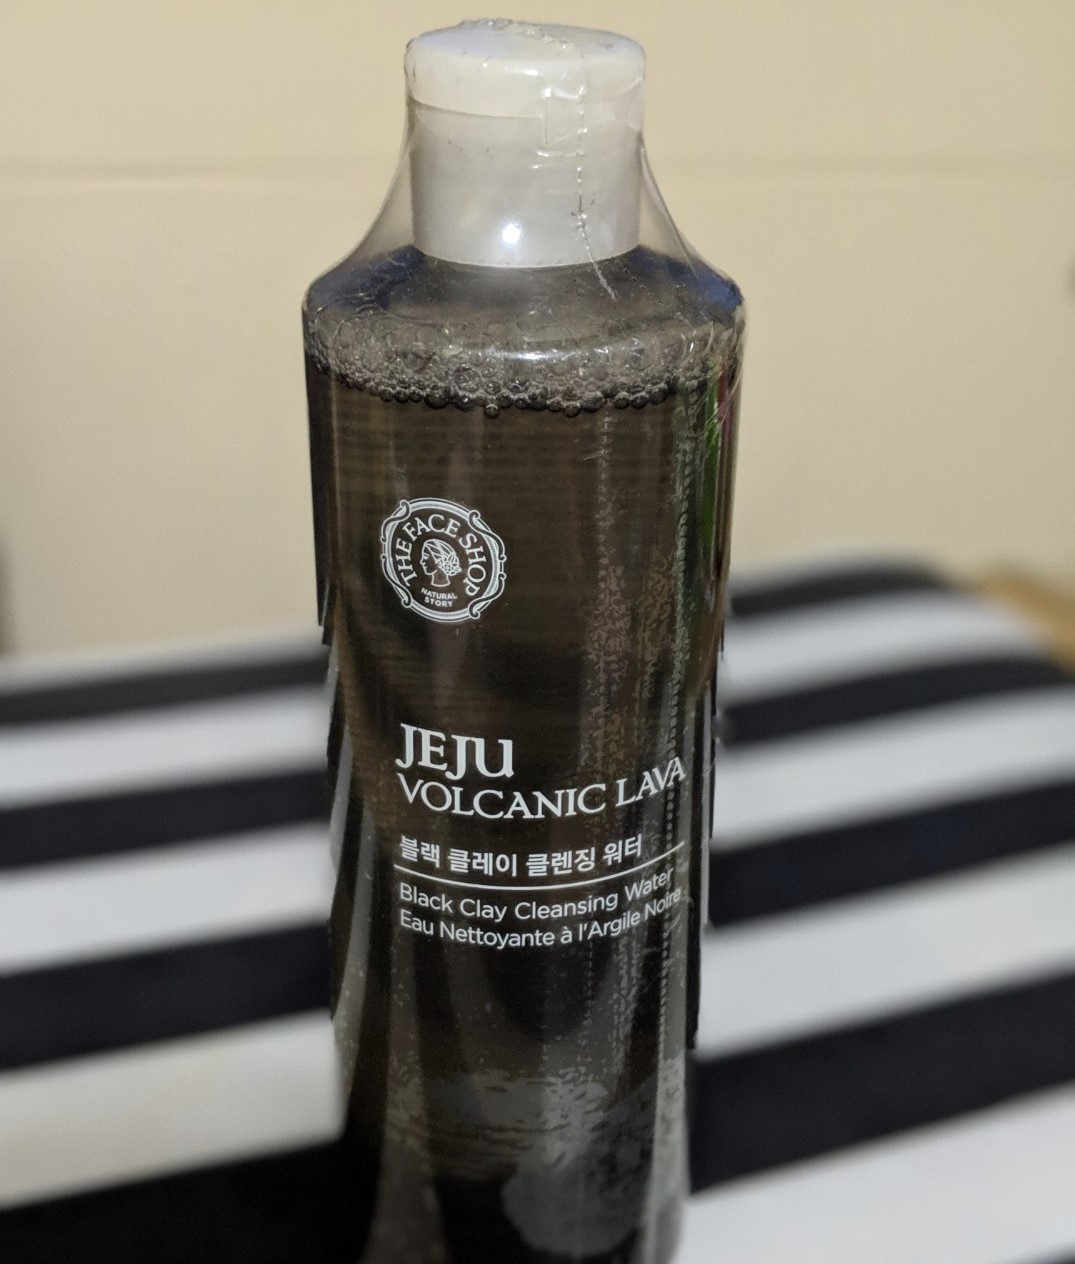 The Face Shop Jeju Volcanic Lava Black Clay Cleansing Water